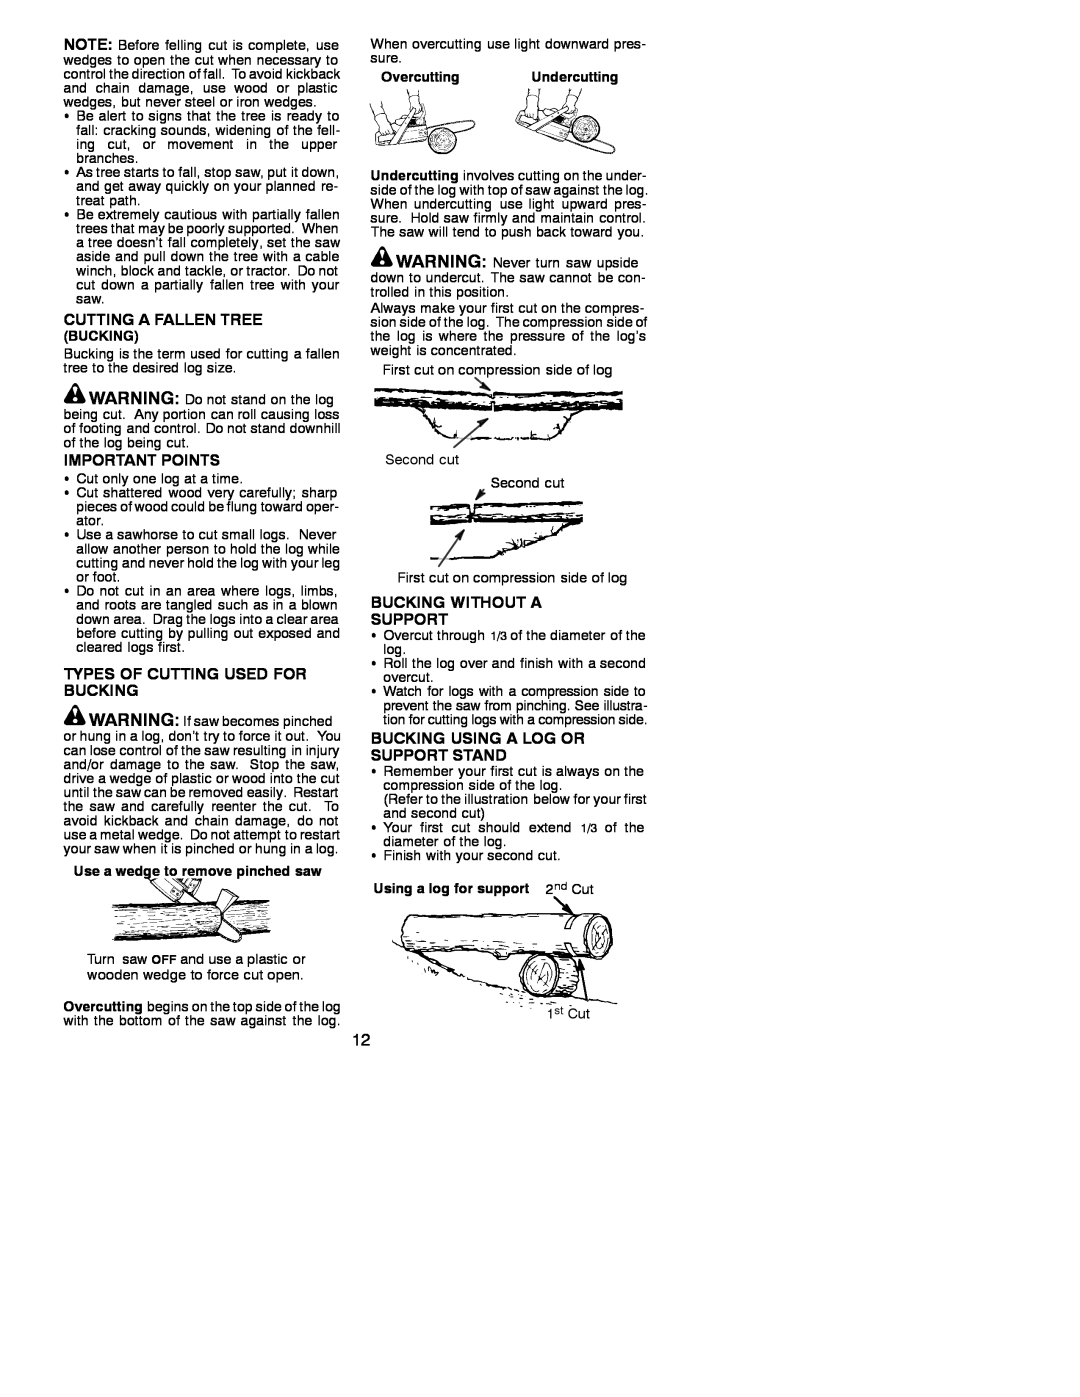 Poulan 2001-02 manual Cutting A Fallen Tree, Important Points, Types Of Cutting Used For Bucking, Bucking Without A Support 